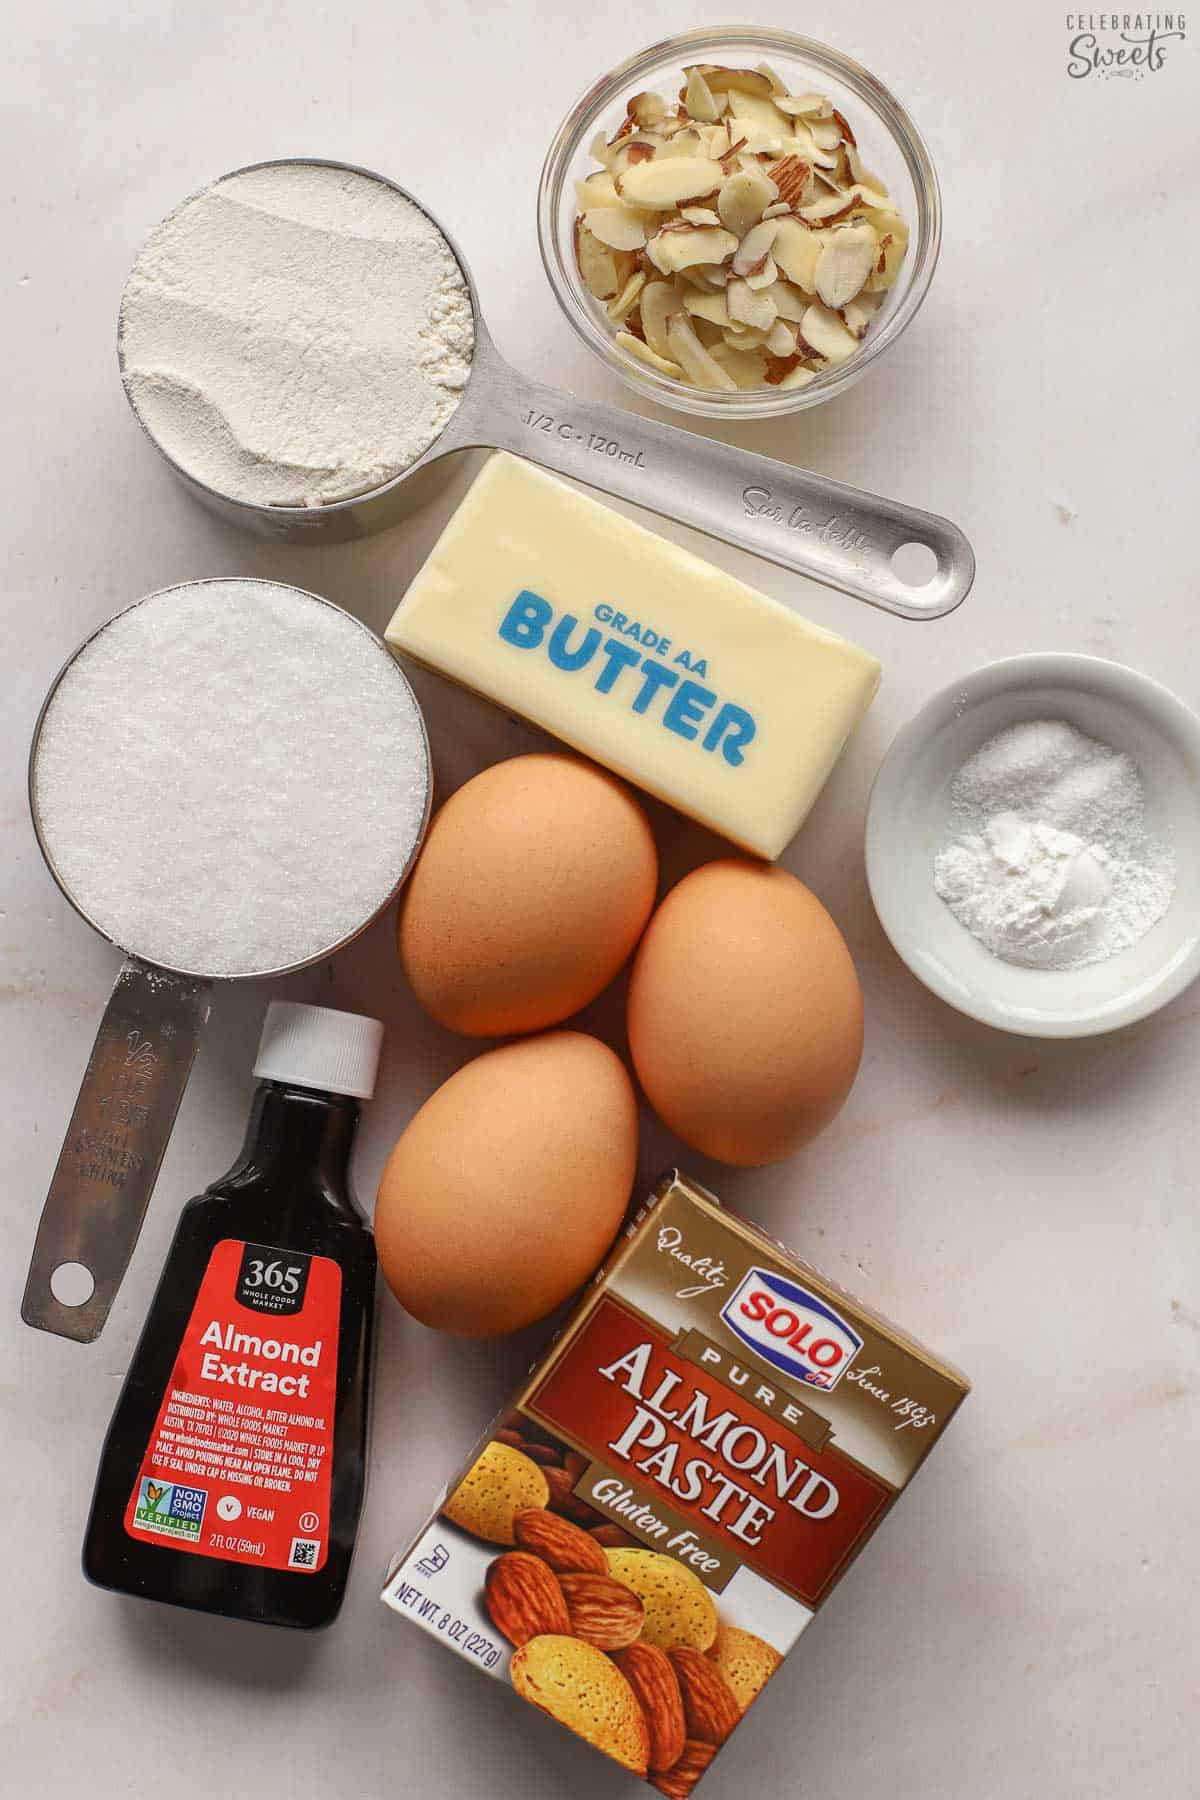 Ingredients for an almond cake: almond paste, almond extract, flour, sugar, eggs, butter, sliced almonds.